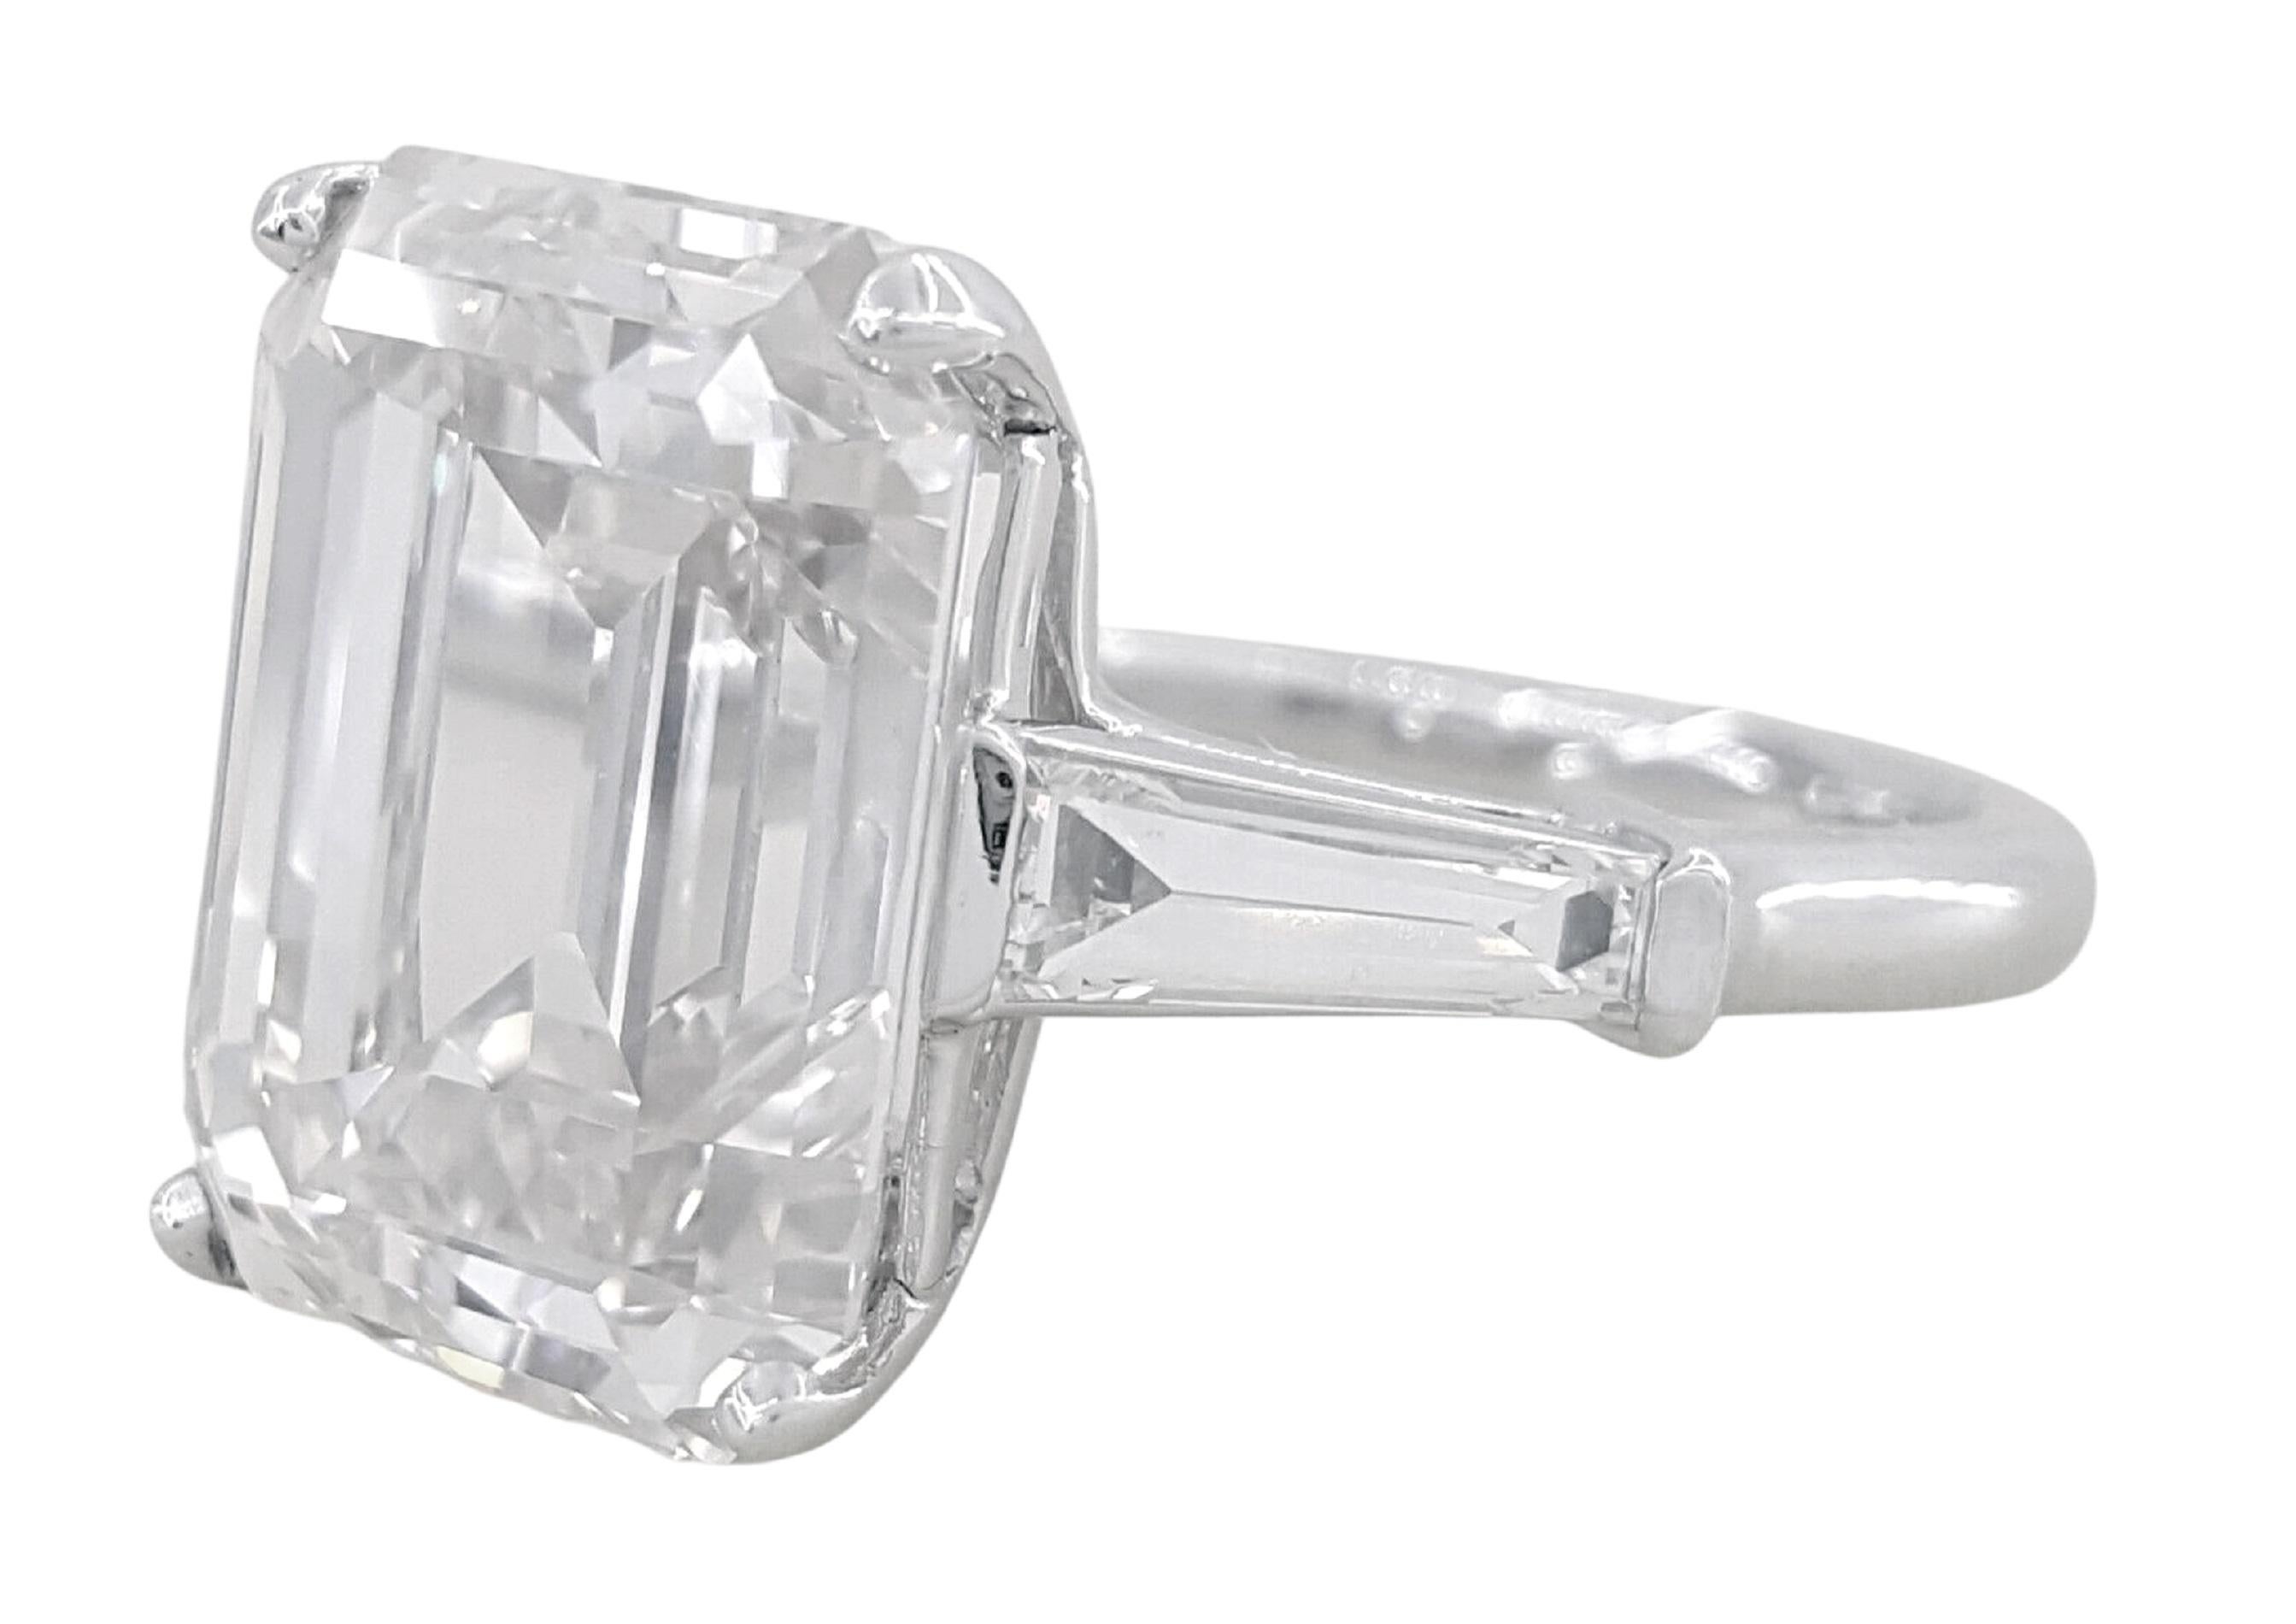 Antinori di Sanpietro offers this amazing 10.24 carats, Internally Flawless in clarity, and a premium K color because the stone faces extremely white! like an H color!

